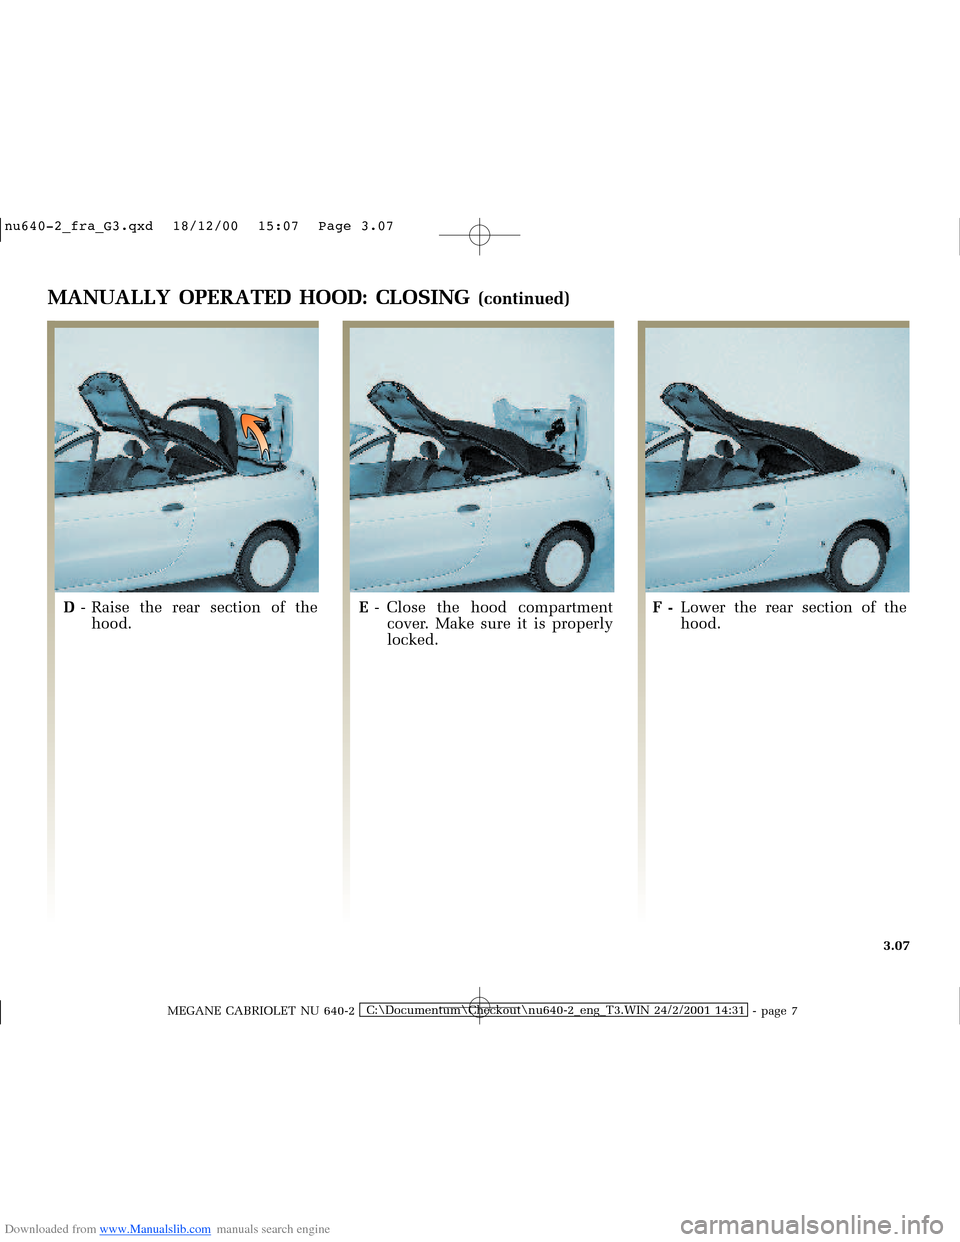 RENAULT MEGANE 2000 X64 / 1.G Owners Manual Downloaded from www.Manualslib.com manuals search engine �Q�X������B�I�U�D�B�*���T�[�G� � ��������� � ������ � �3�D�J�H� ����
MEGANE CABRIOLET NU 640-2C:\Documentum\Chec